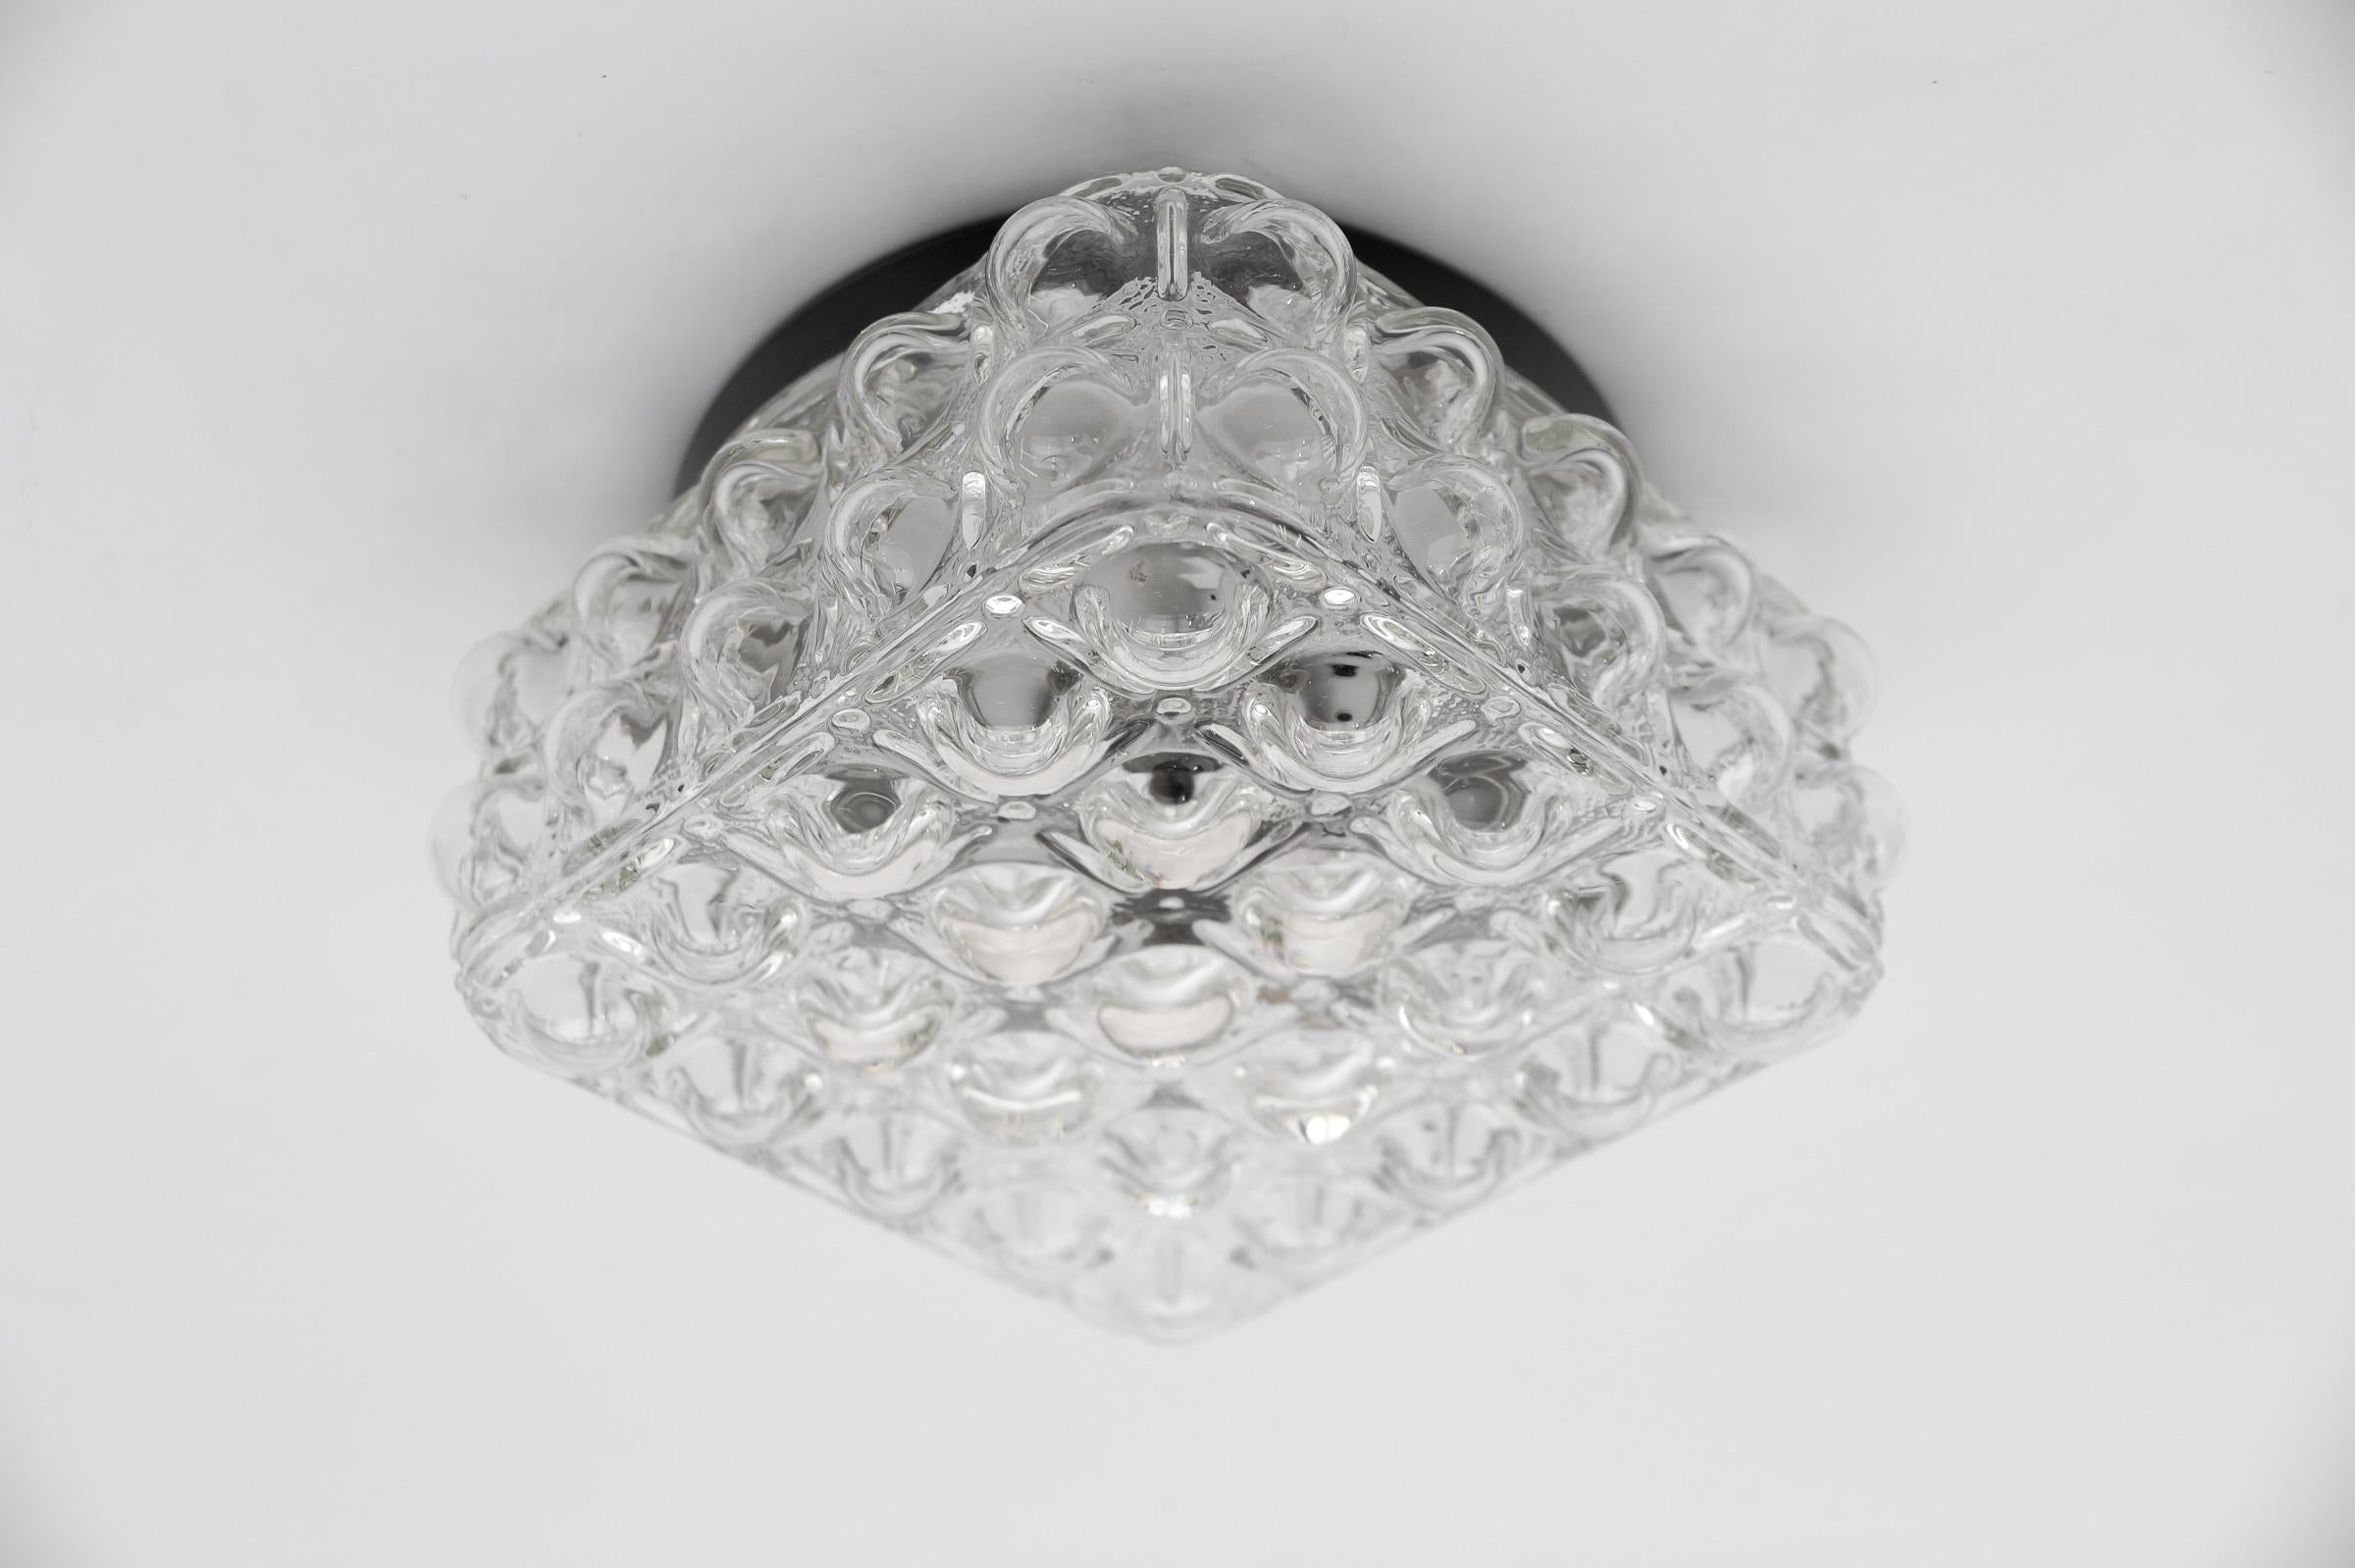 1 of 2 Clear Bubble Glass Flush Mount Lamp by Helena Tynell, Germany 1960s

Dimensions
Height: 4.52 in. (11.5 cm)
Width: 8.26 in. (21 cm)
Depth: 8.26 in. (21 cm)

The fixture need 1 x E27 standard bulb with 60W max.

Light bulbs are not